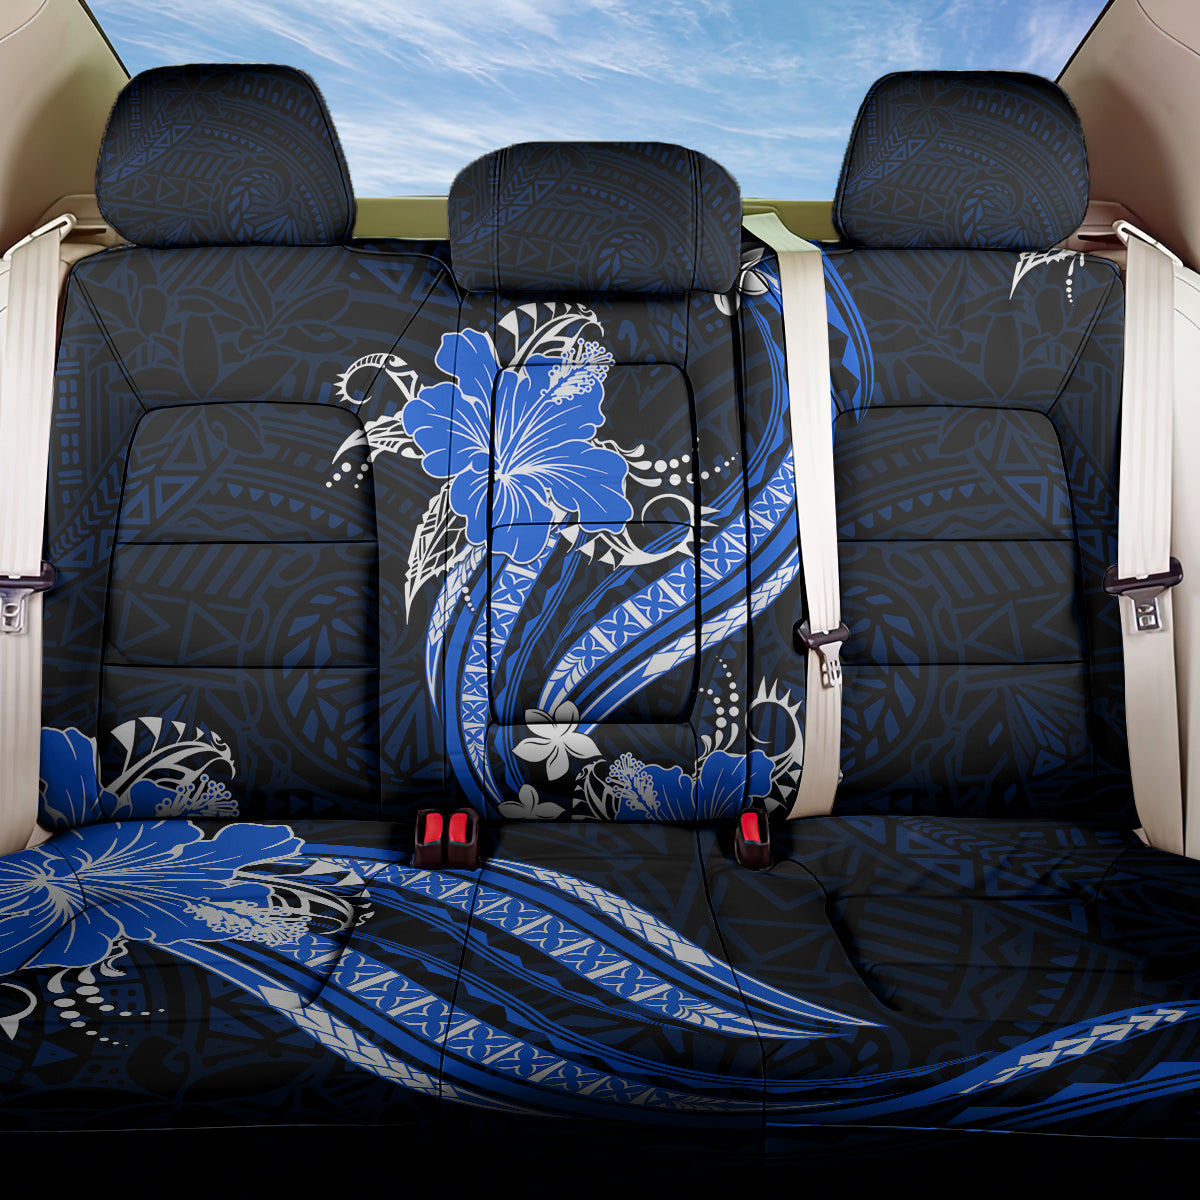 Blue Polynesian Pattern With Tropical Flowers Back Car Seat Cover LT05 One Size Blue - Polynesian Pride